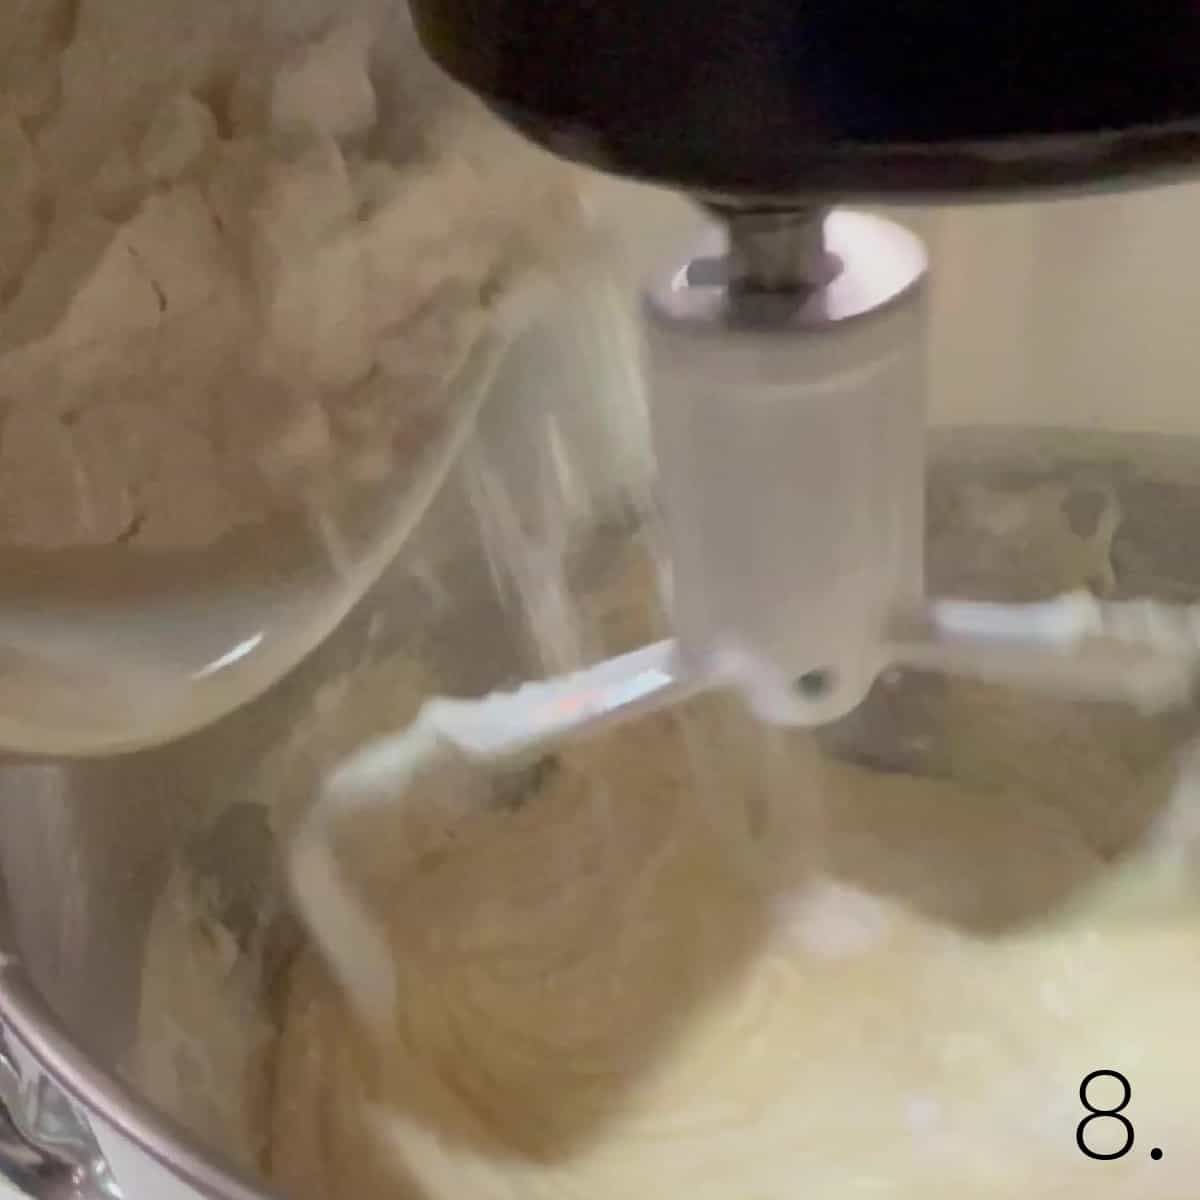 Flour being poured into cupcake batter for Boston Cream Cupcakes.